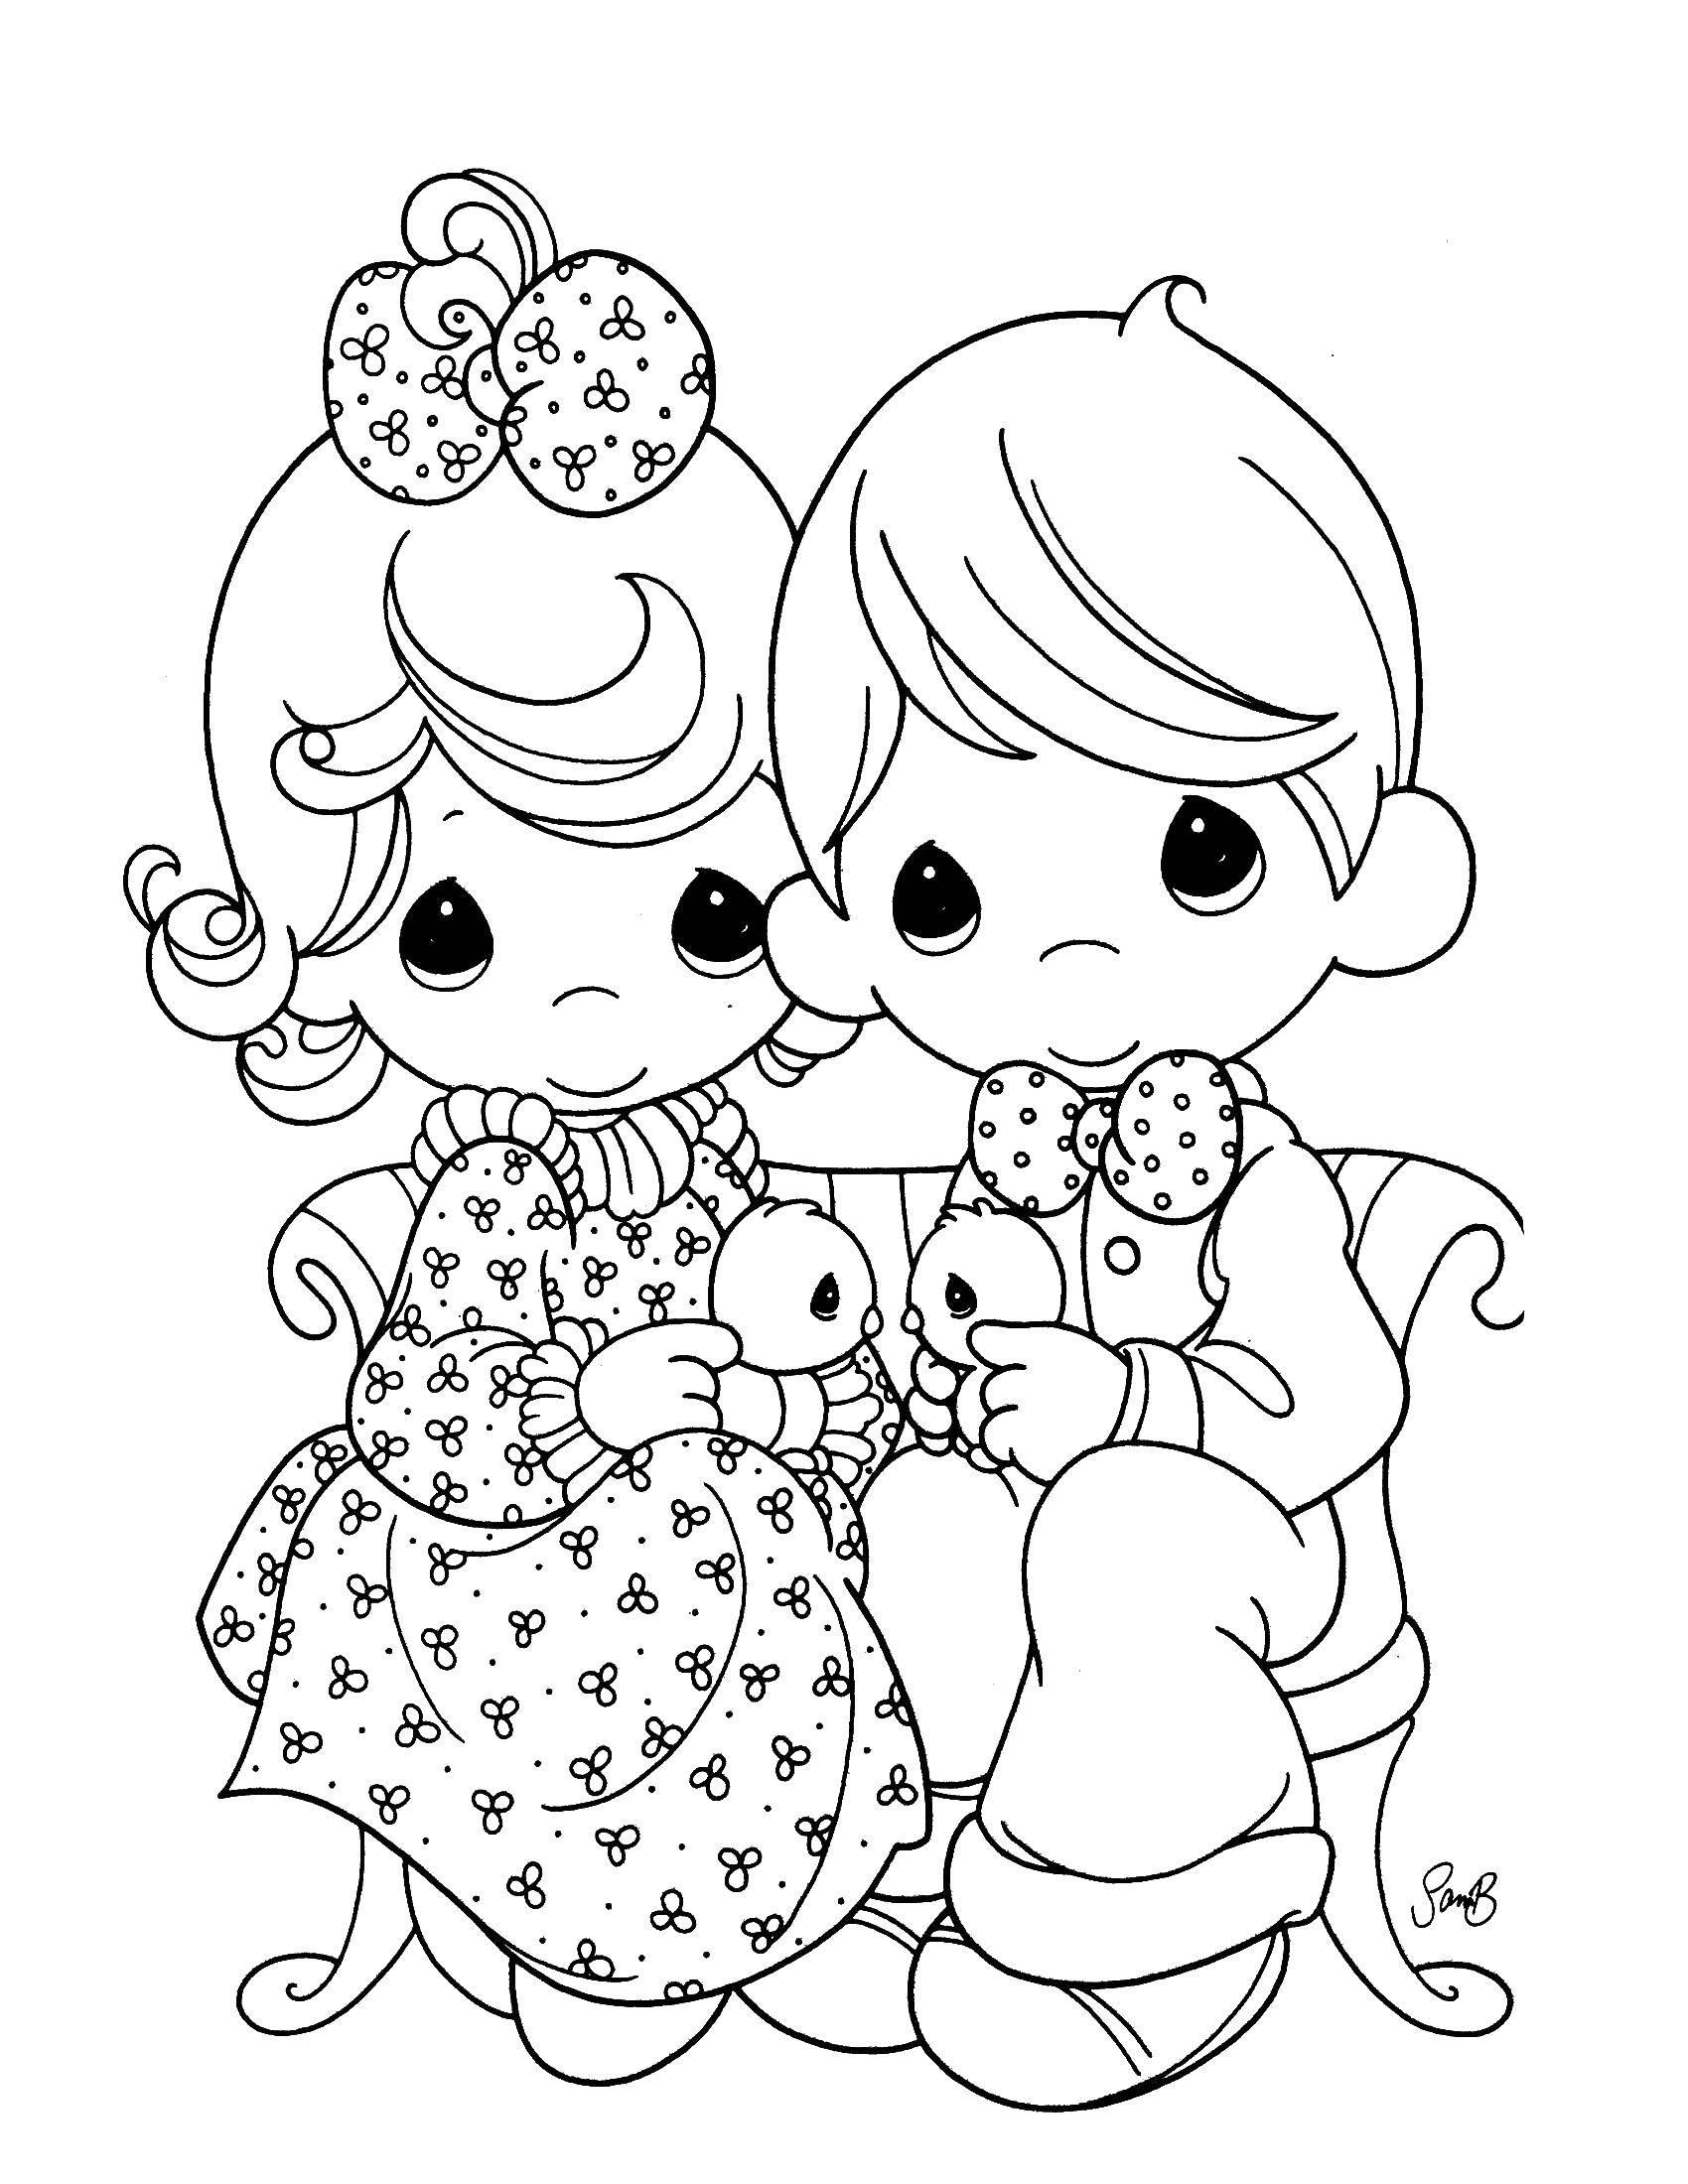 Coloring Children in costumes. Category Wedding. Tags:  boy, girl, doves.